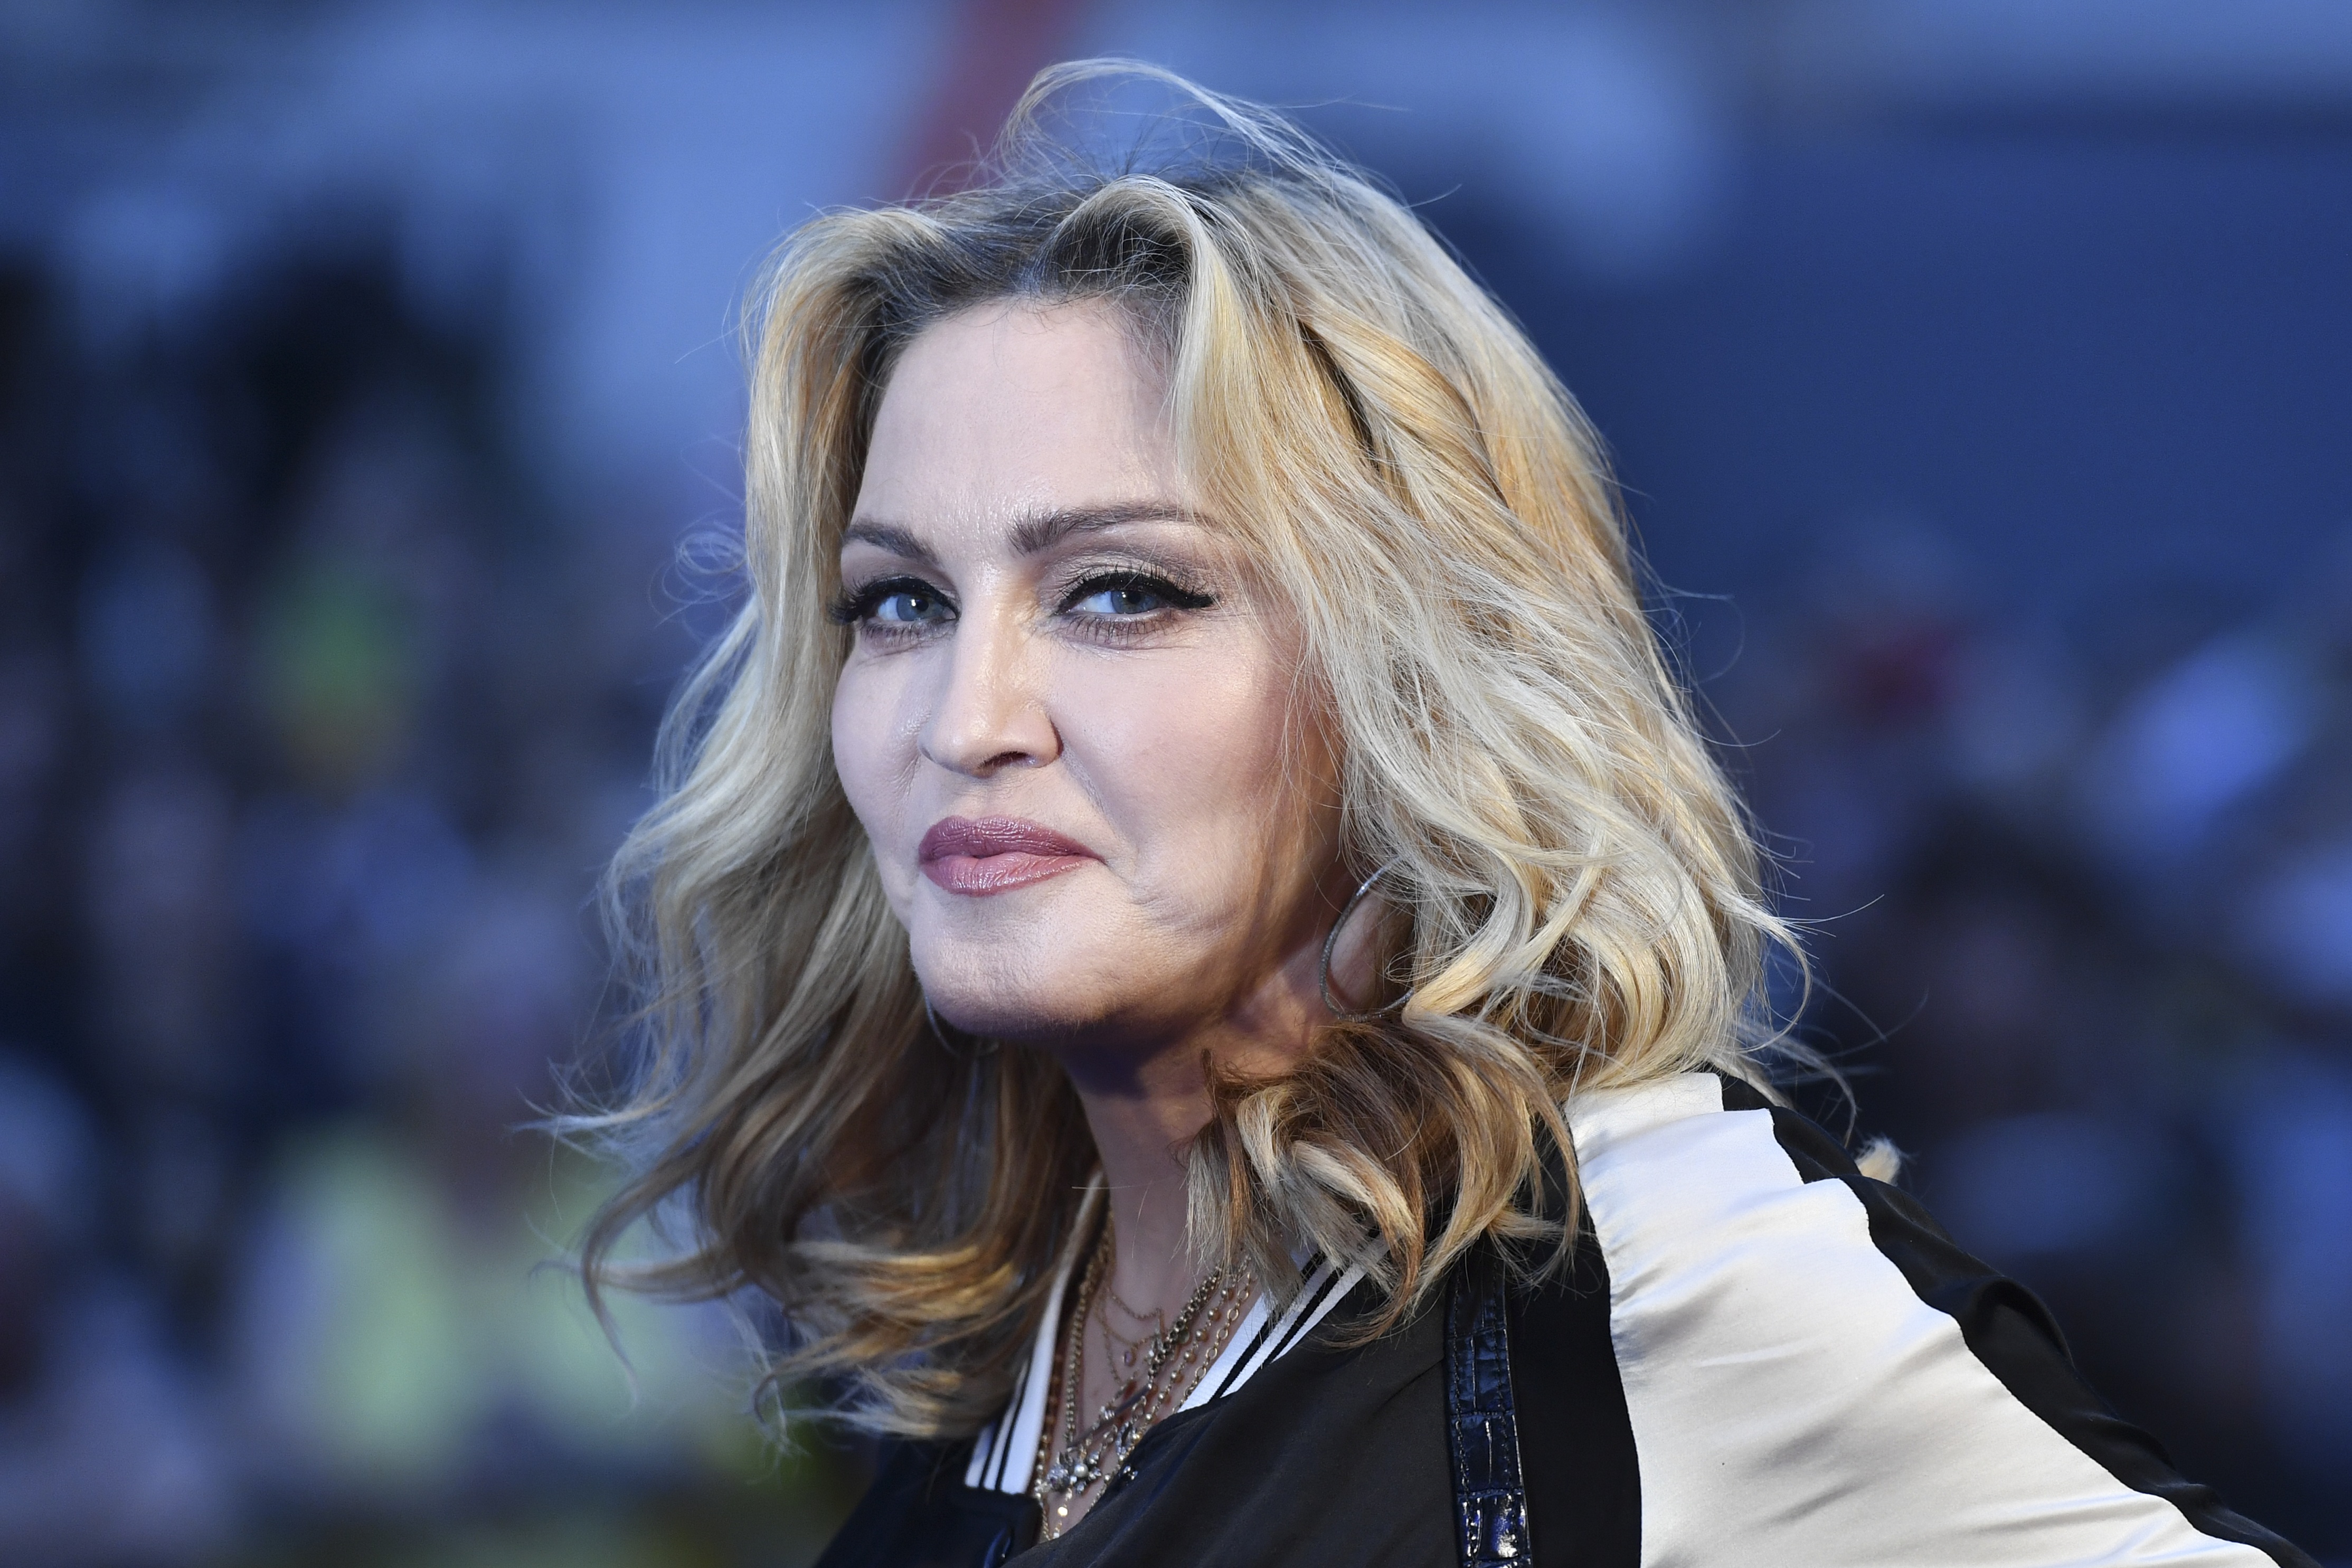 US singer-songwriter Madonna poses arriving on the carpet to attend a special screening of the film "The Beatles Eight Days A Week: The Touring Years" in London on September 15, 2016. / AFP PHOTO / Ben STANSALL